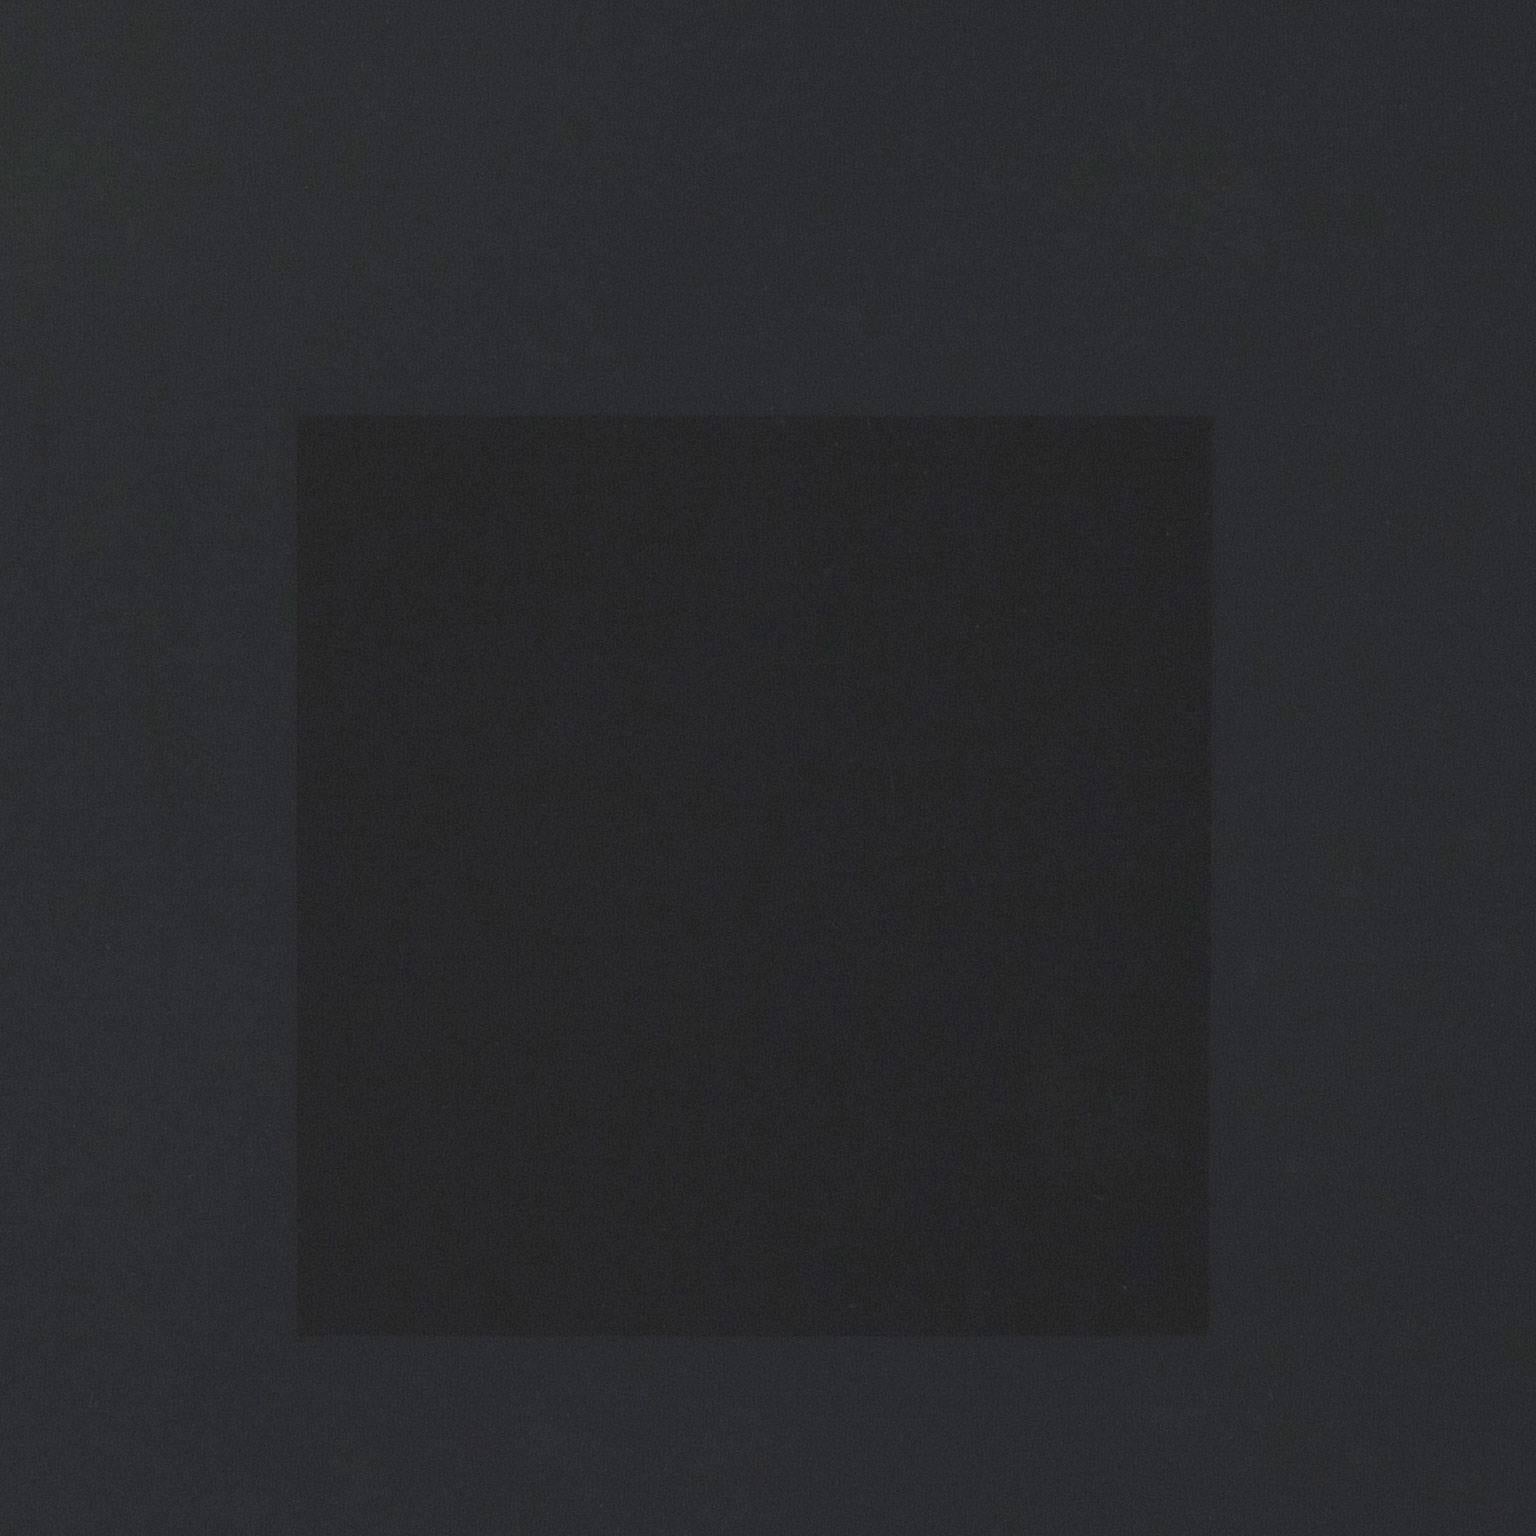 Seller specializes in Josef Albers prints. We are pleased to be offering this iconic and intimate classic square work. 

The interplay of color arranged in a grouping of squares is classic Josef Albers (1888-1976). Throughout his career he explored